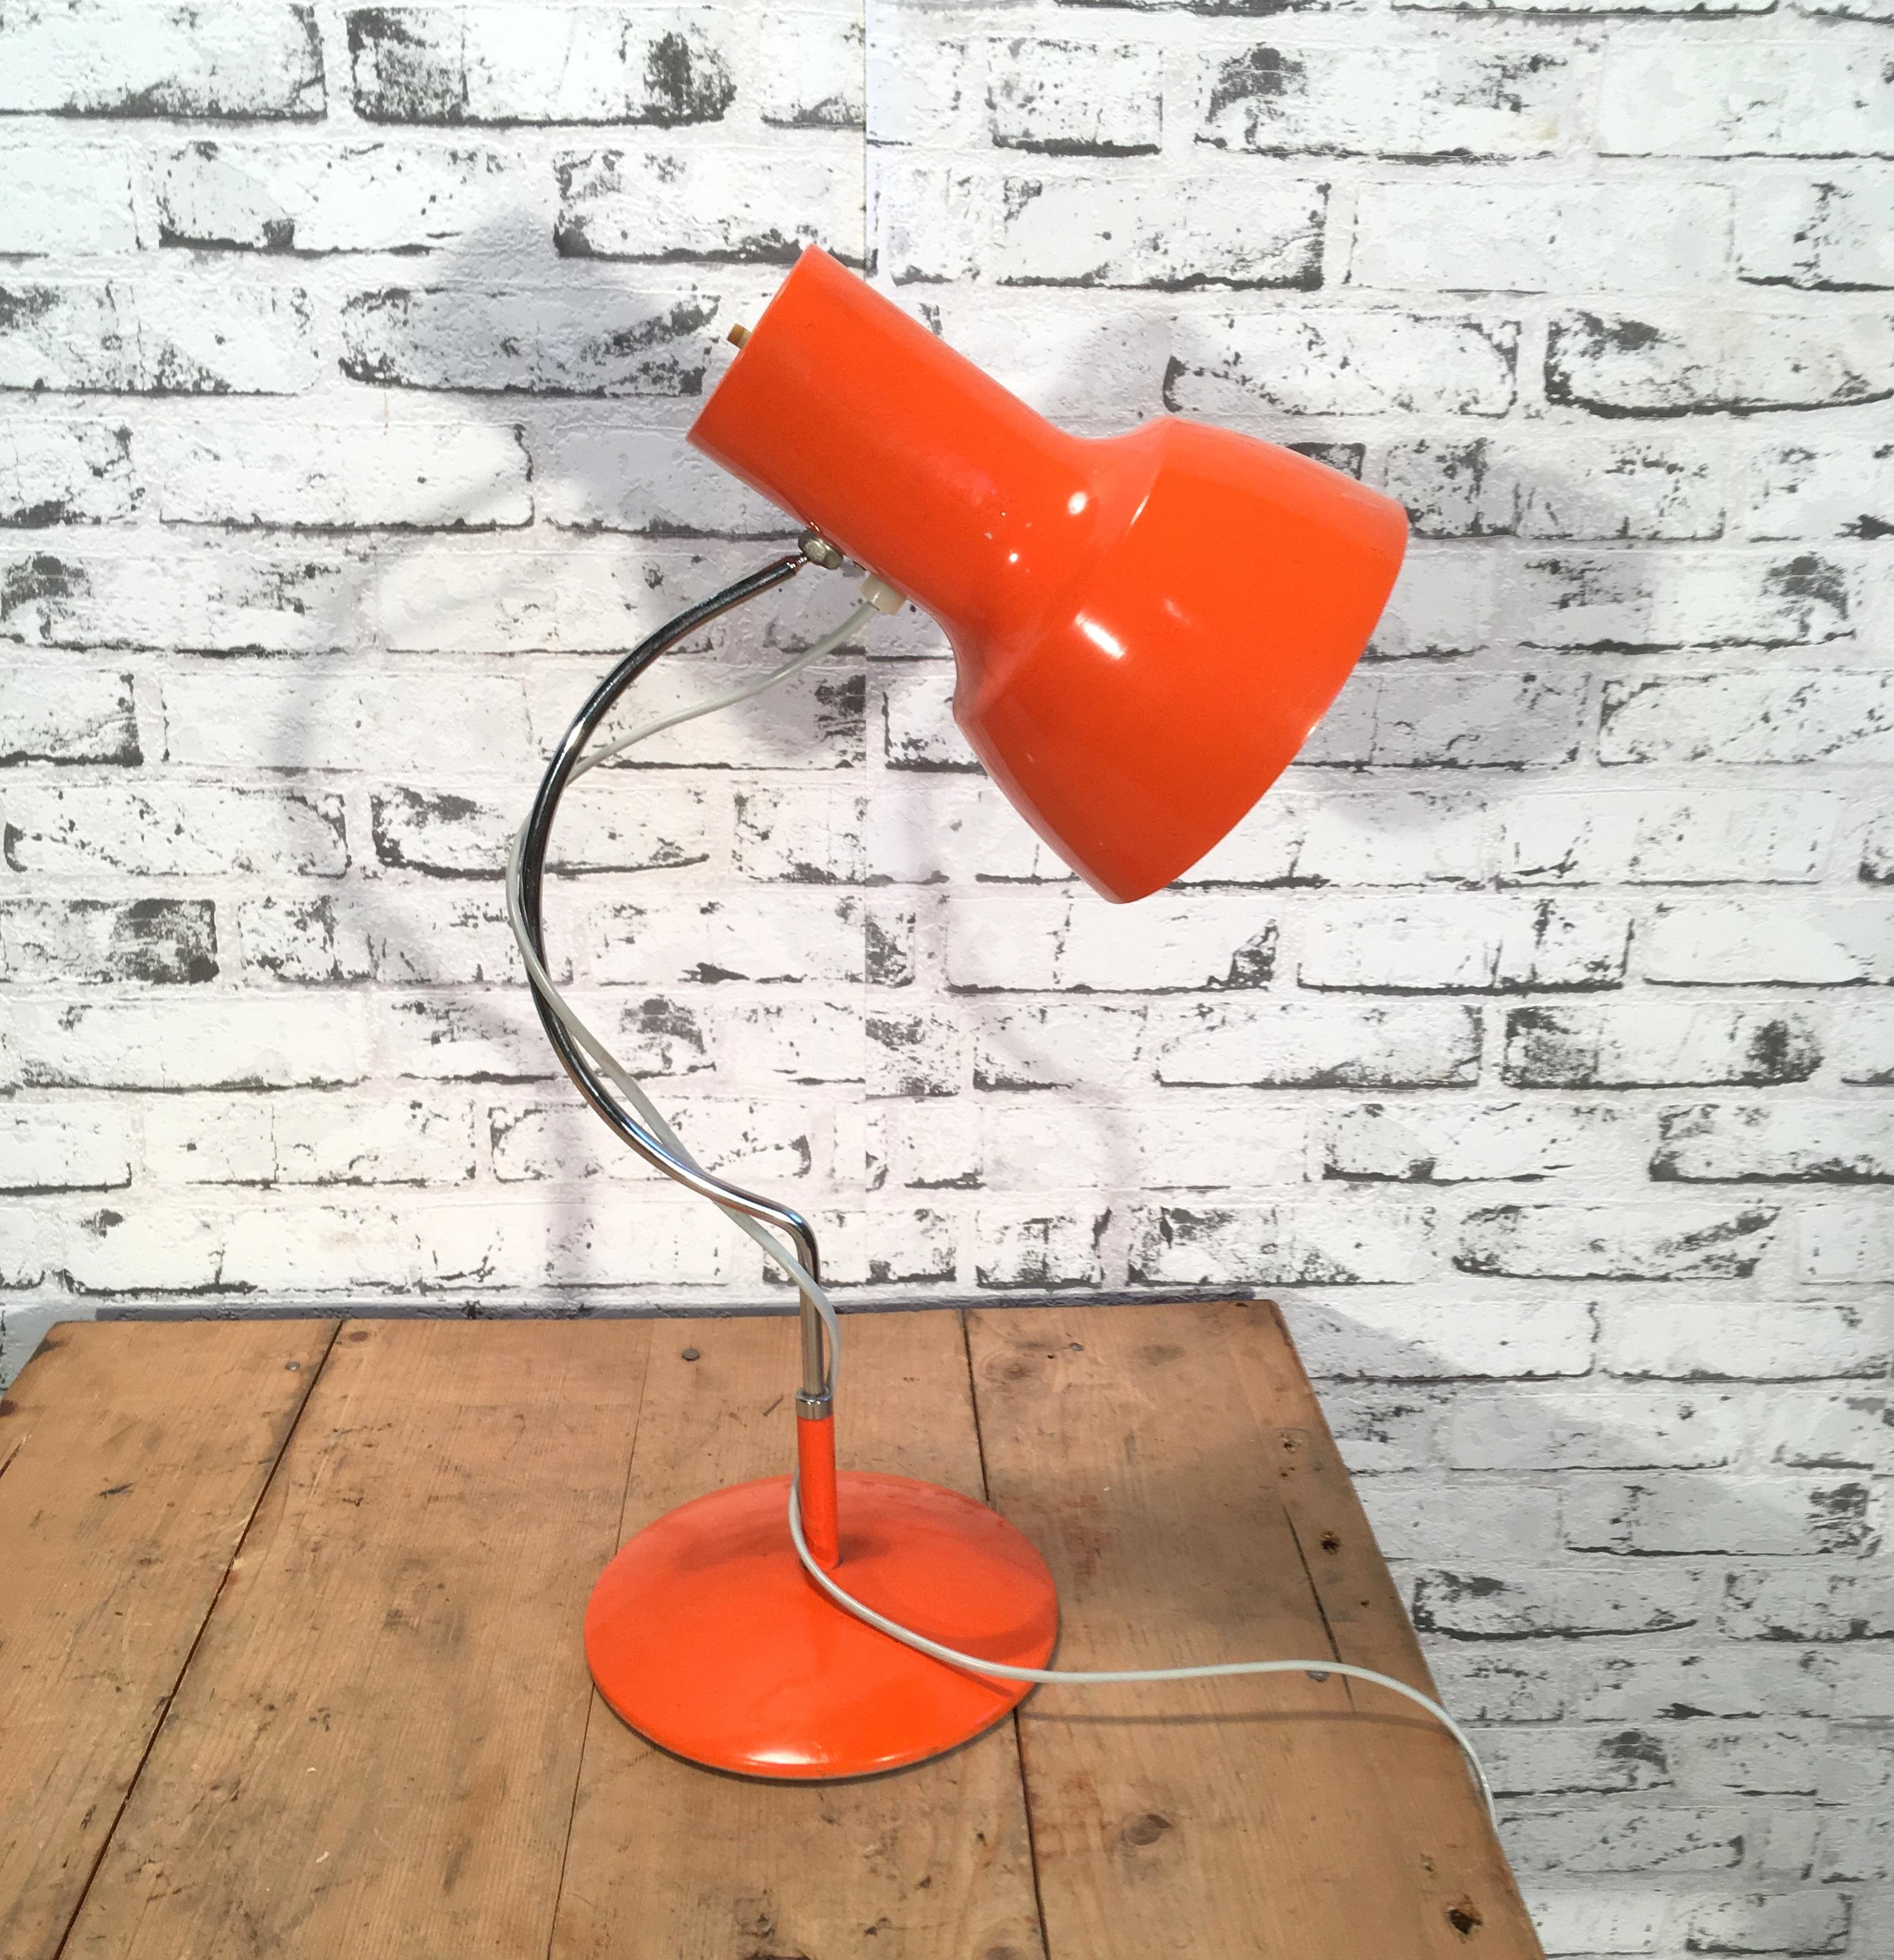 This table lamp was designed by Josef Hurka and produced in former Czechoslovakia by Napako during the 1960s. The lamp has a steel body and an aluminium lampshade. Switch is situated directly on shade. Good vintage condition. Fully